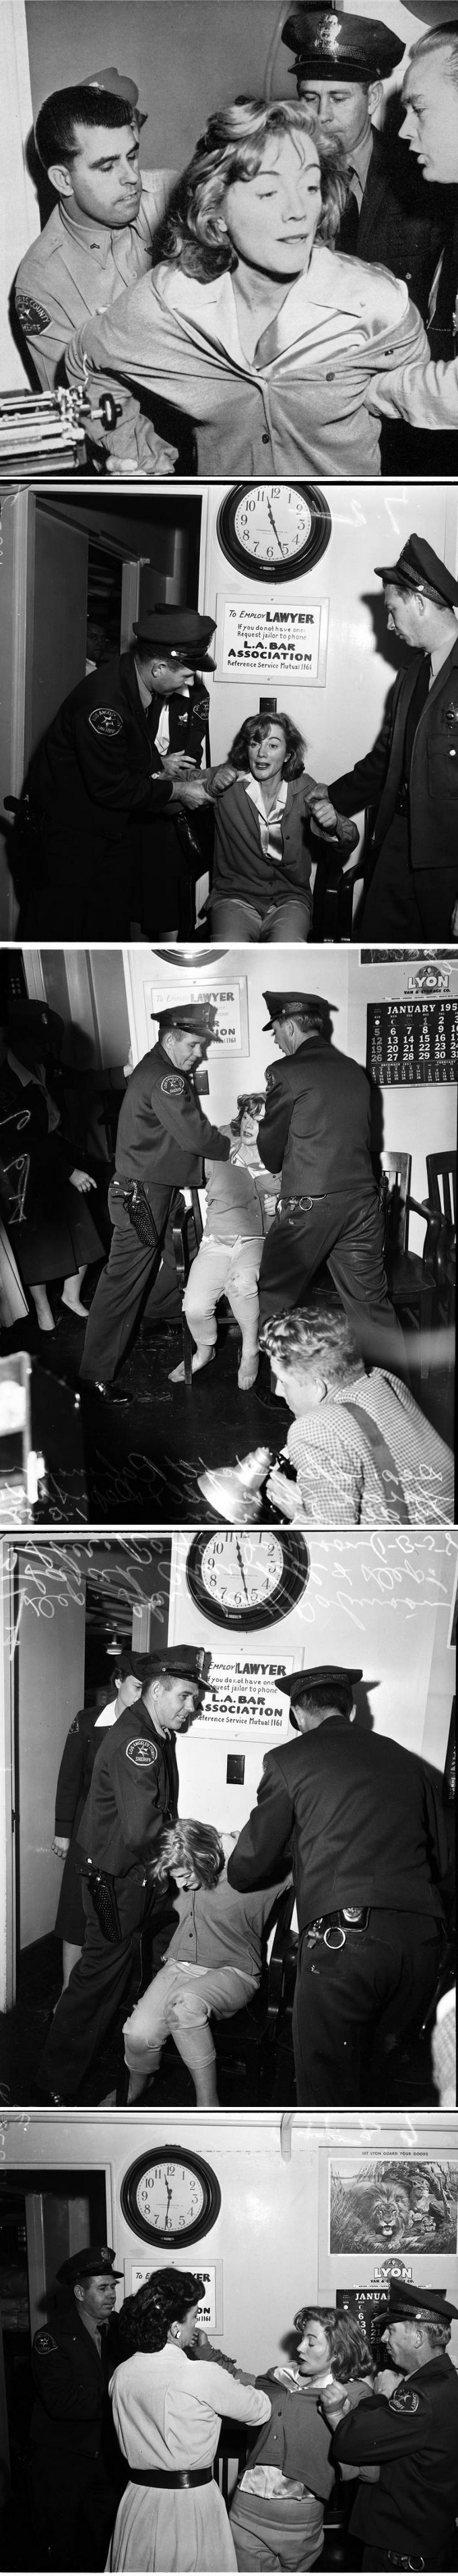 1958_actress_sarah_churchill_the_second_daughter_of_winston_churchill_is_arrested_for_being_drunk_malibu_california.jpg